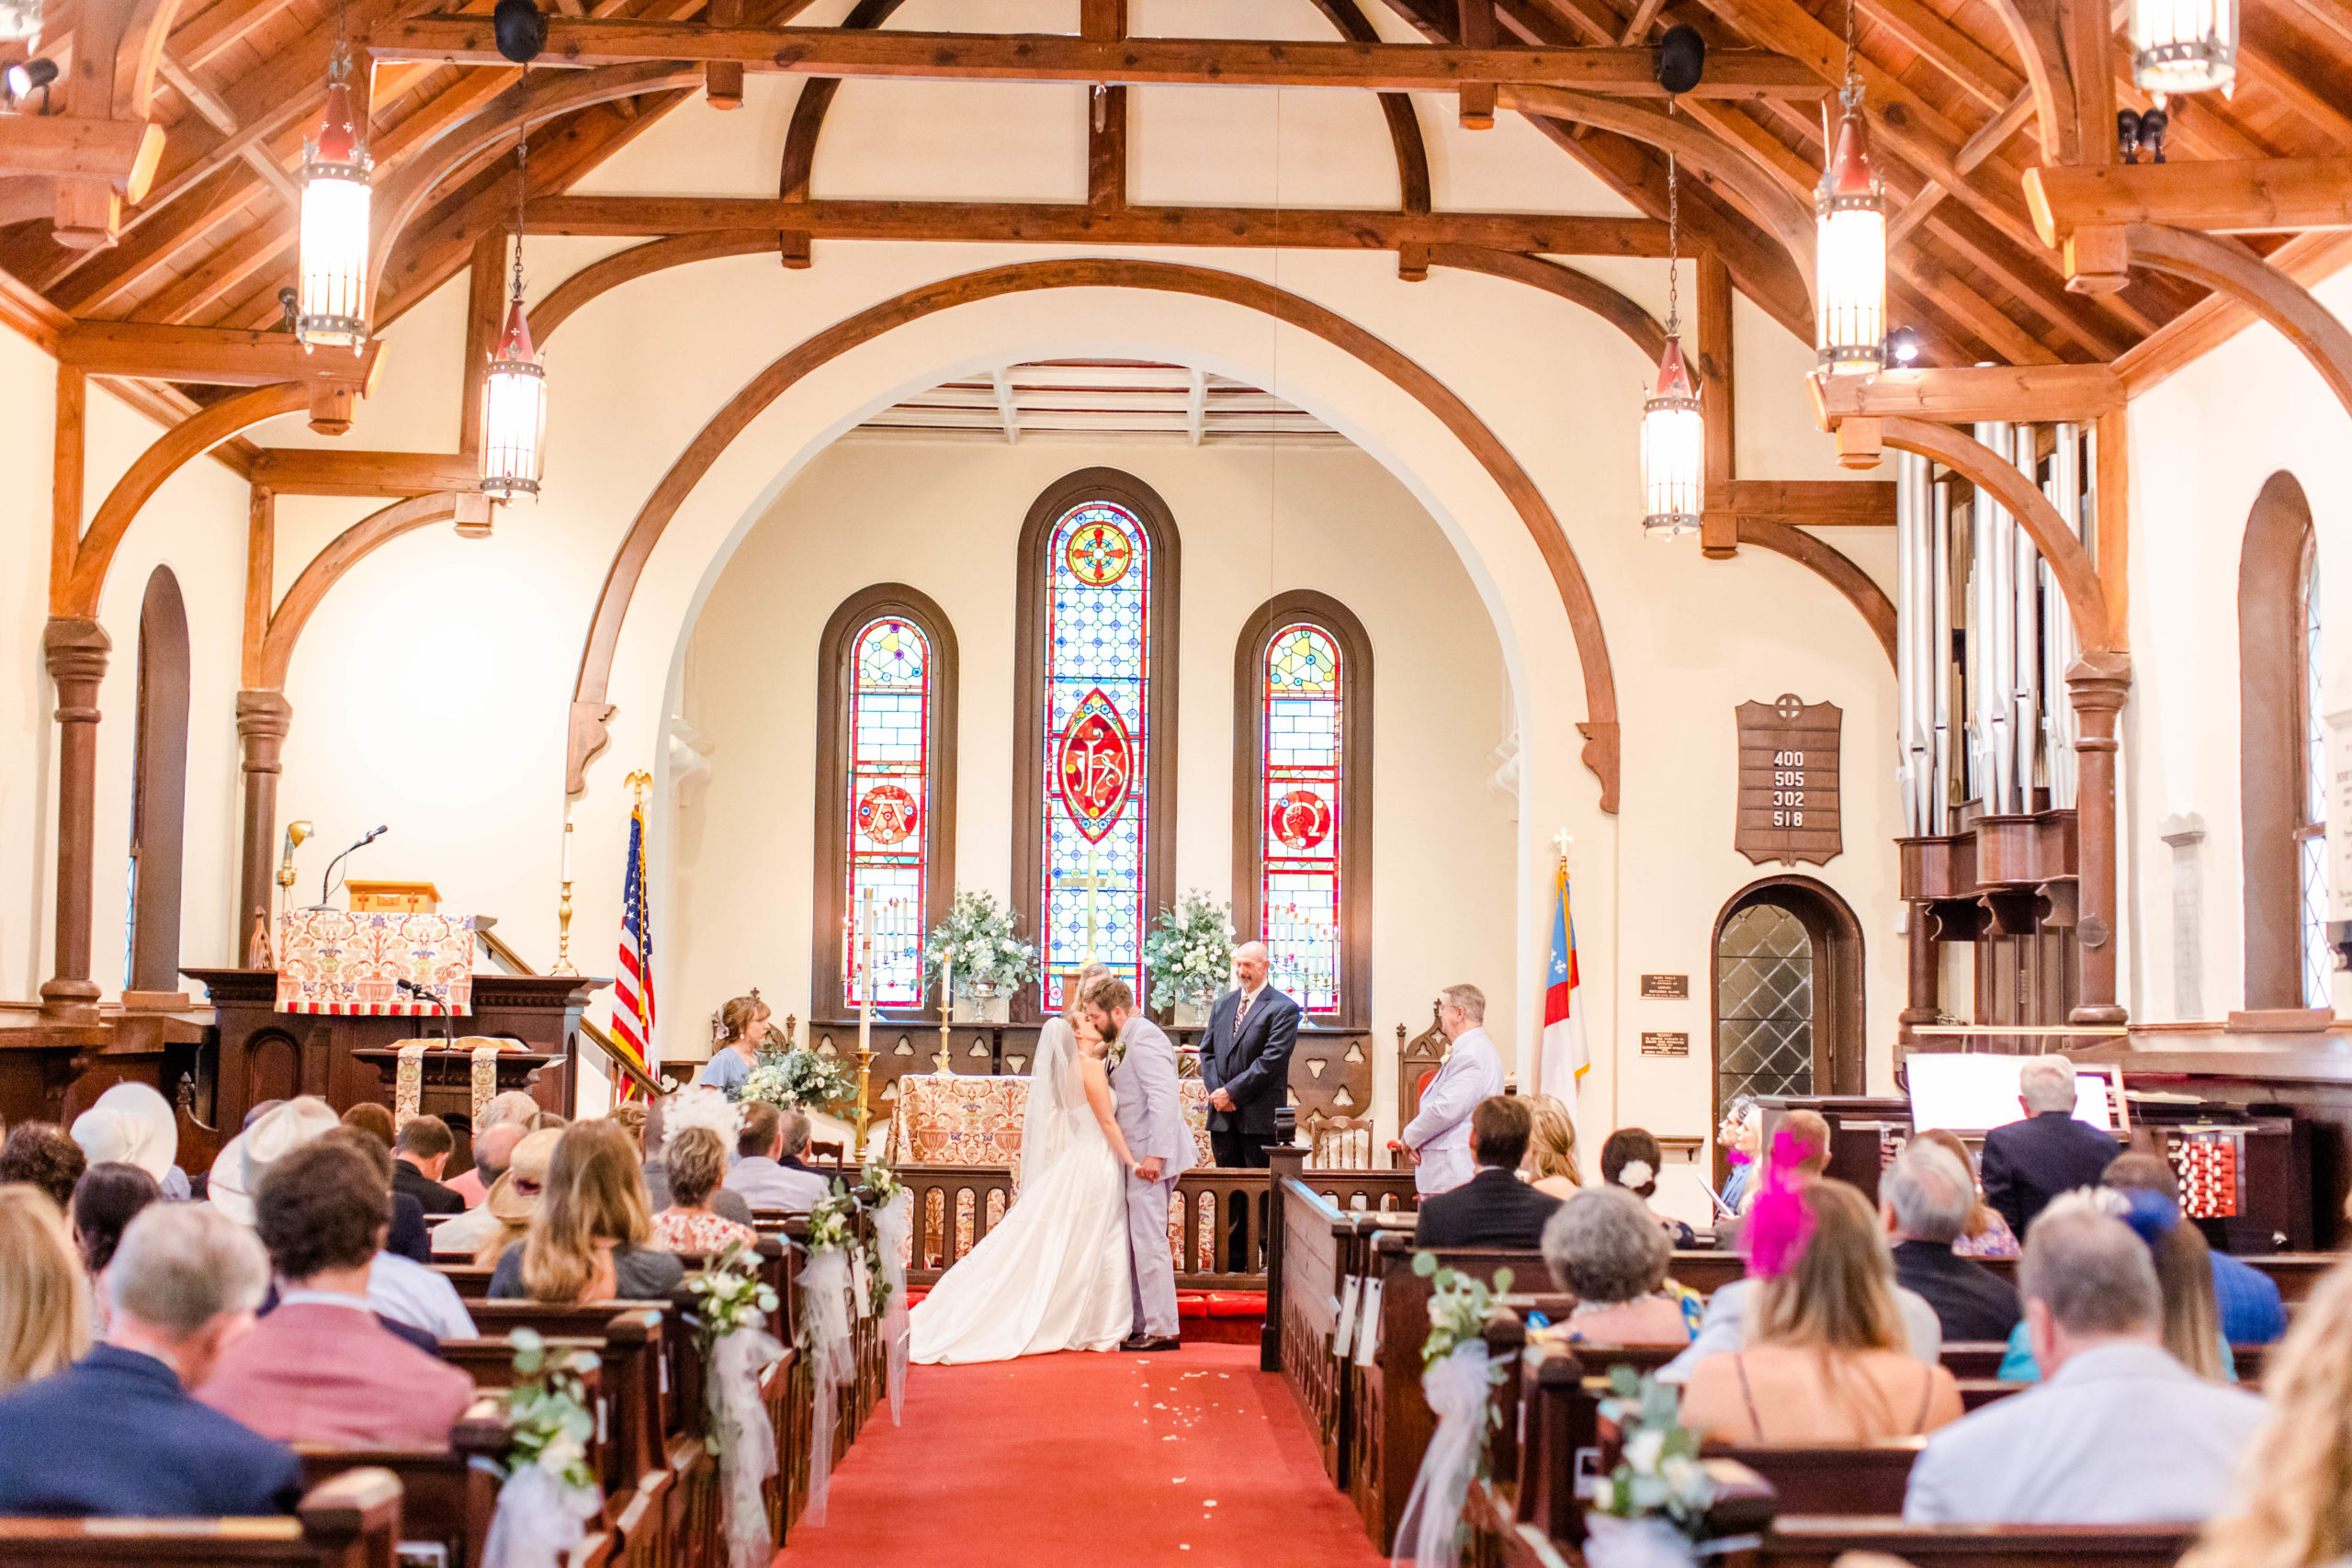 wedding ceremony at St. John's in the Wilderness in Hendersonville, NC